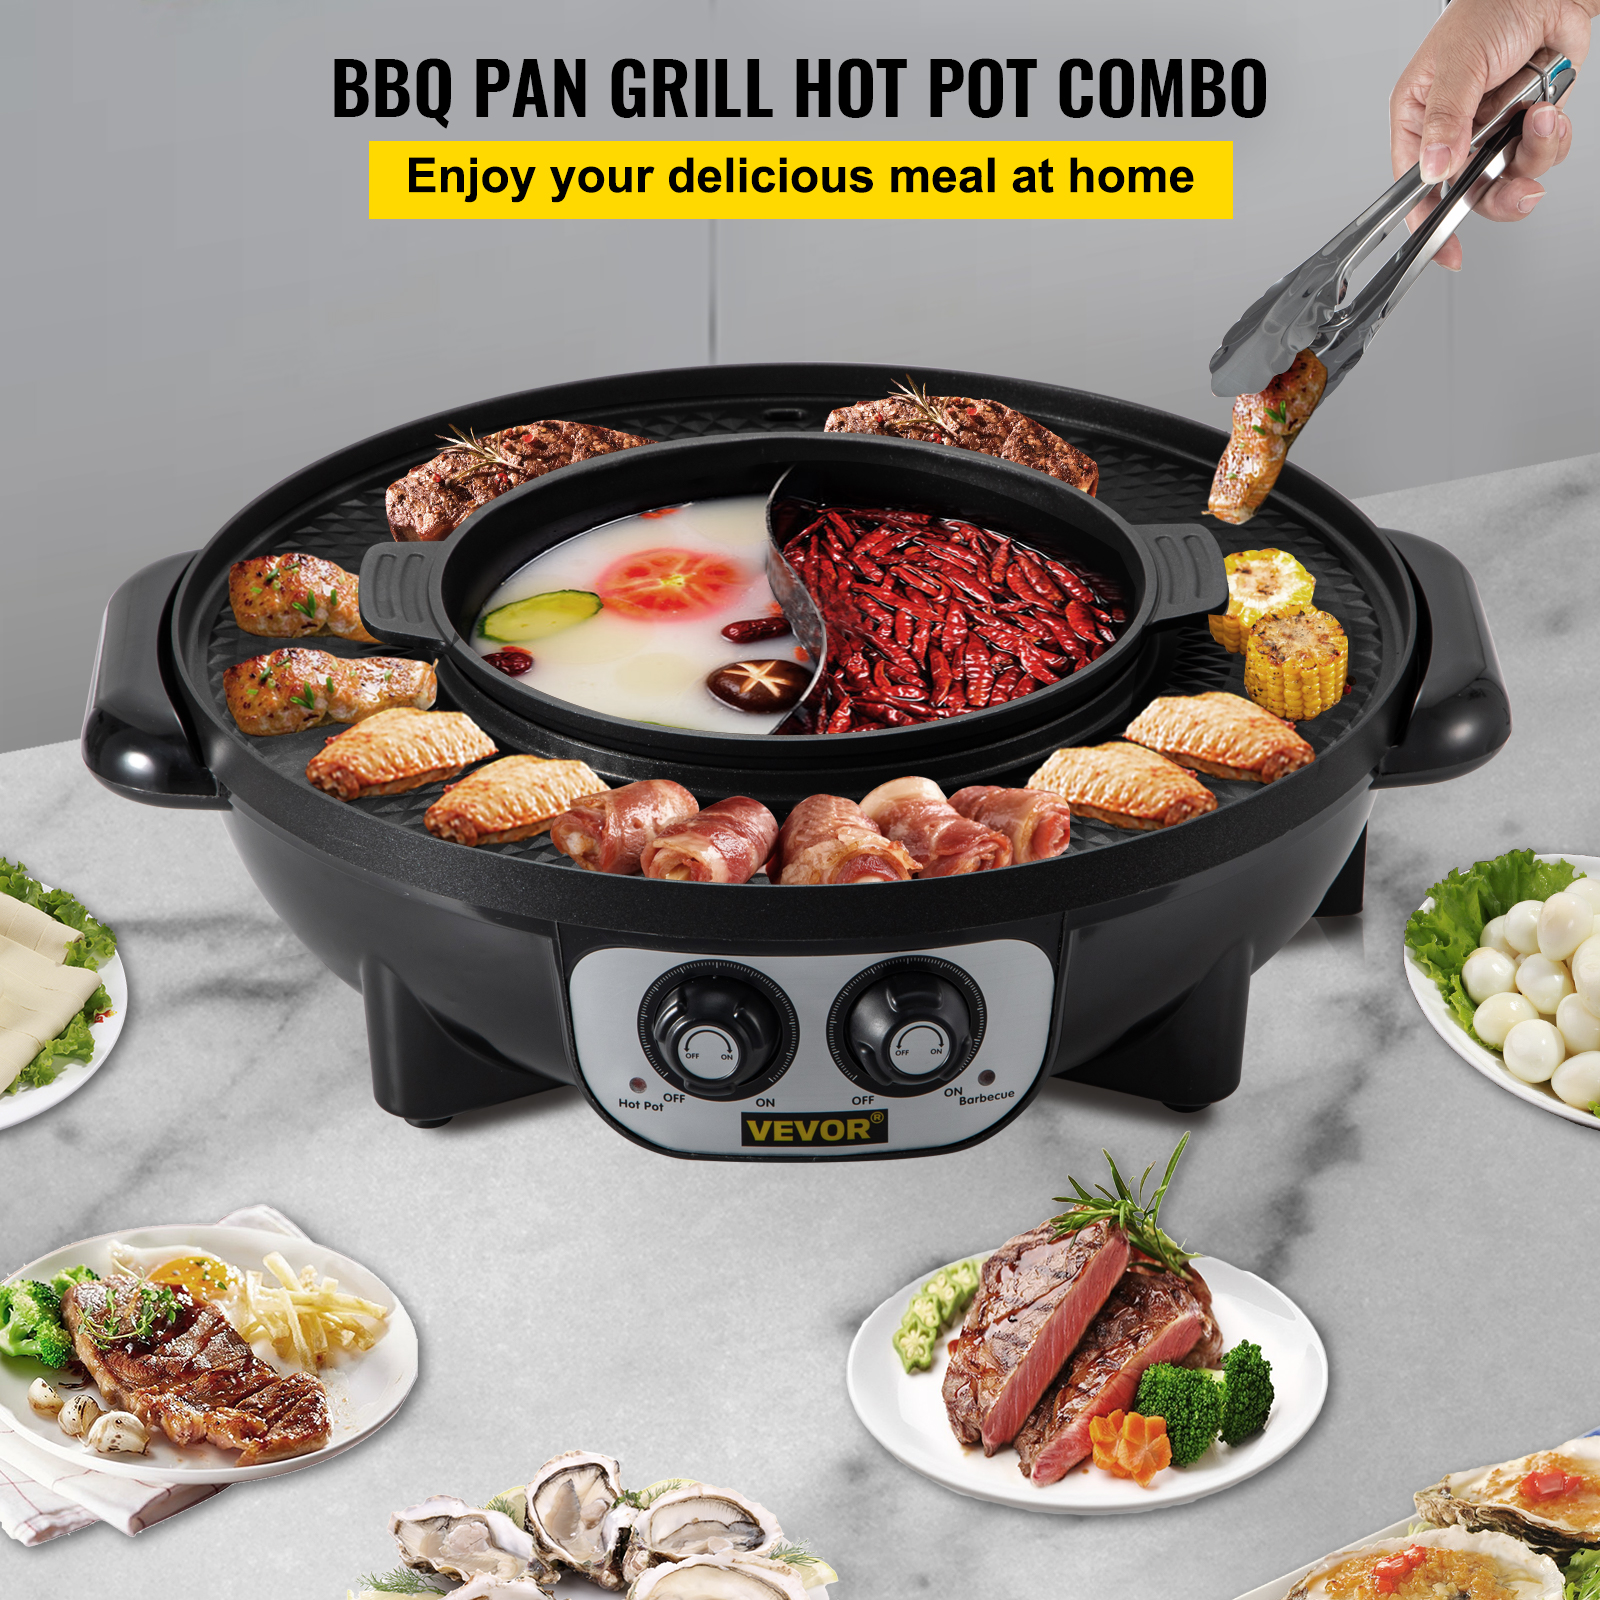 VEVOR 2 in 1 Electric Grill and Hot Pot, 2400W BBQ Pan Grill and Hot Pot